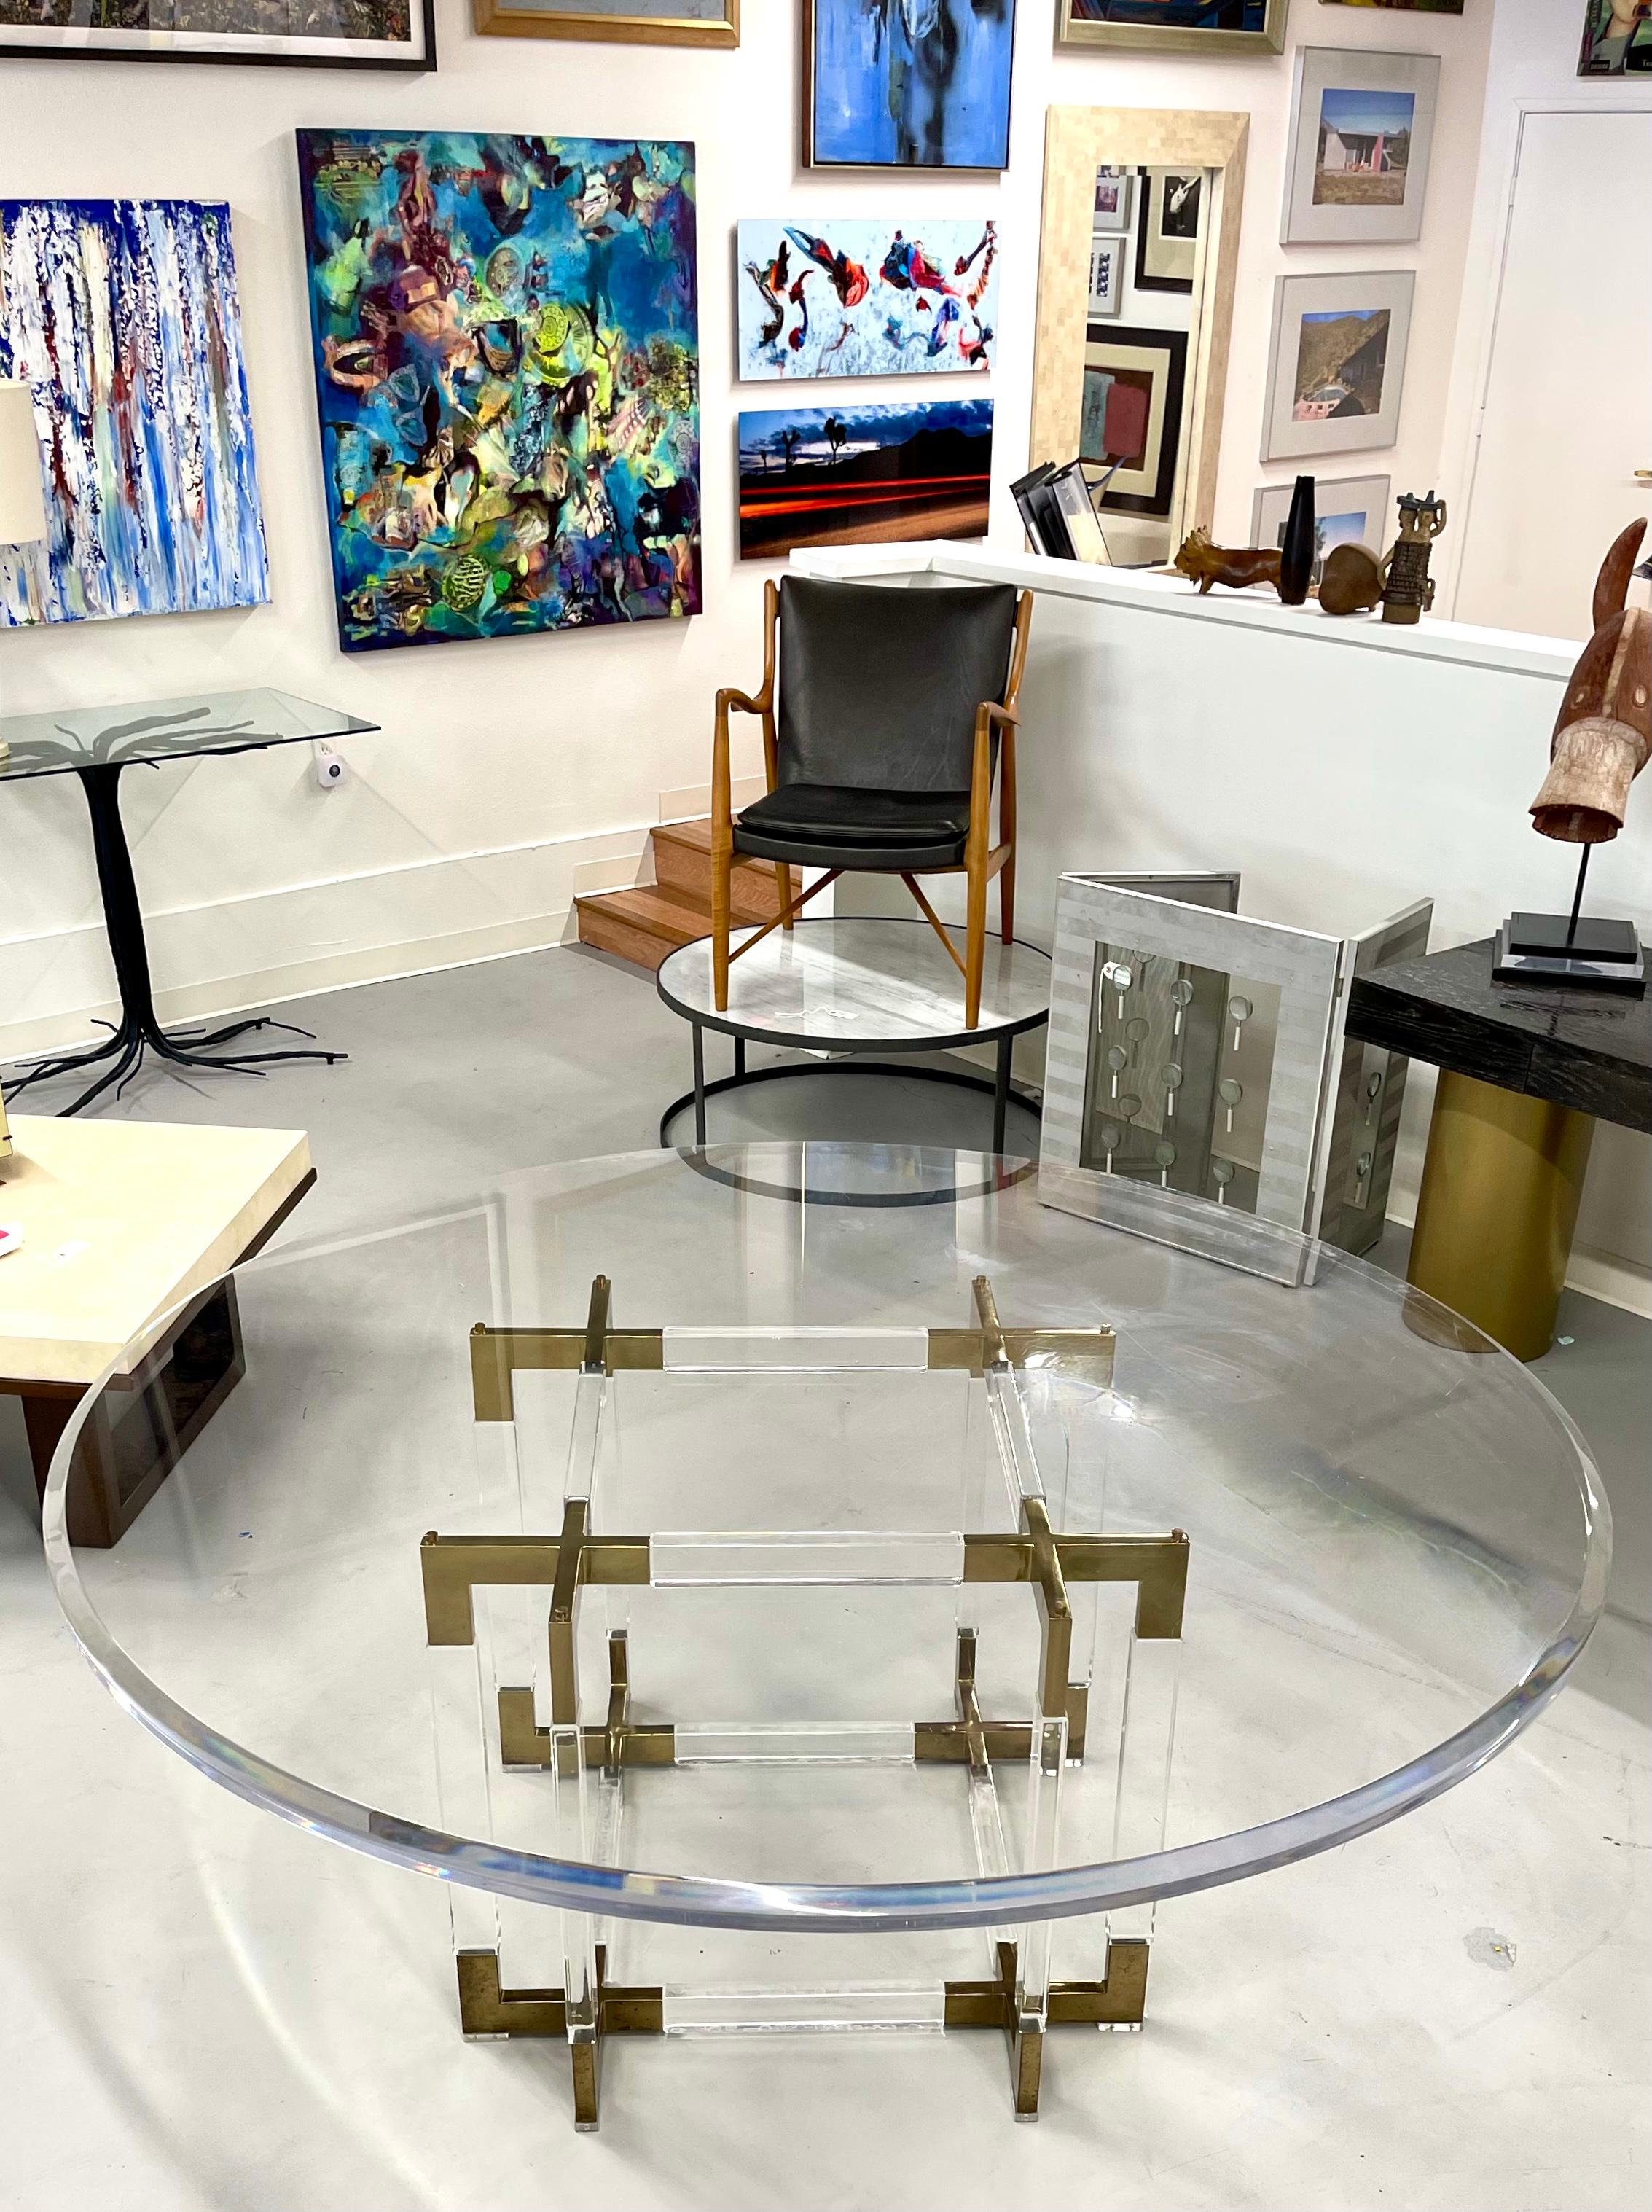 A vintage 1970's metric line Lucite and brass dining table by Charles Hollis Jones. This table features a beveled edge 72 inch diameter thick lucite top. The table is dining height at 29.75 inches. The base is in good age appropriate condition,